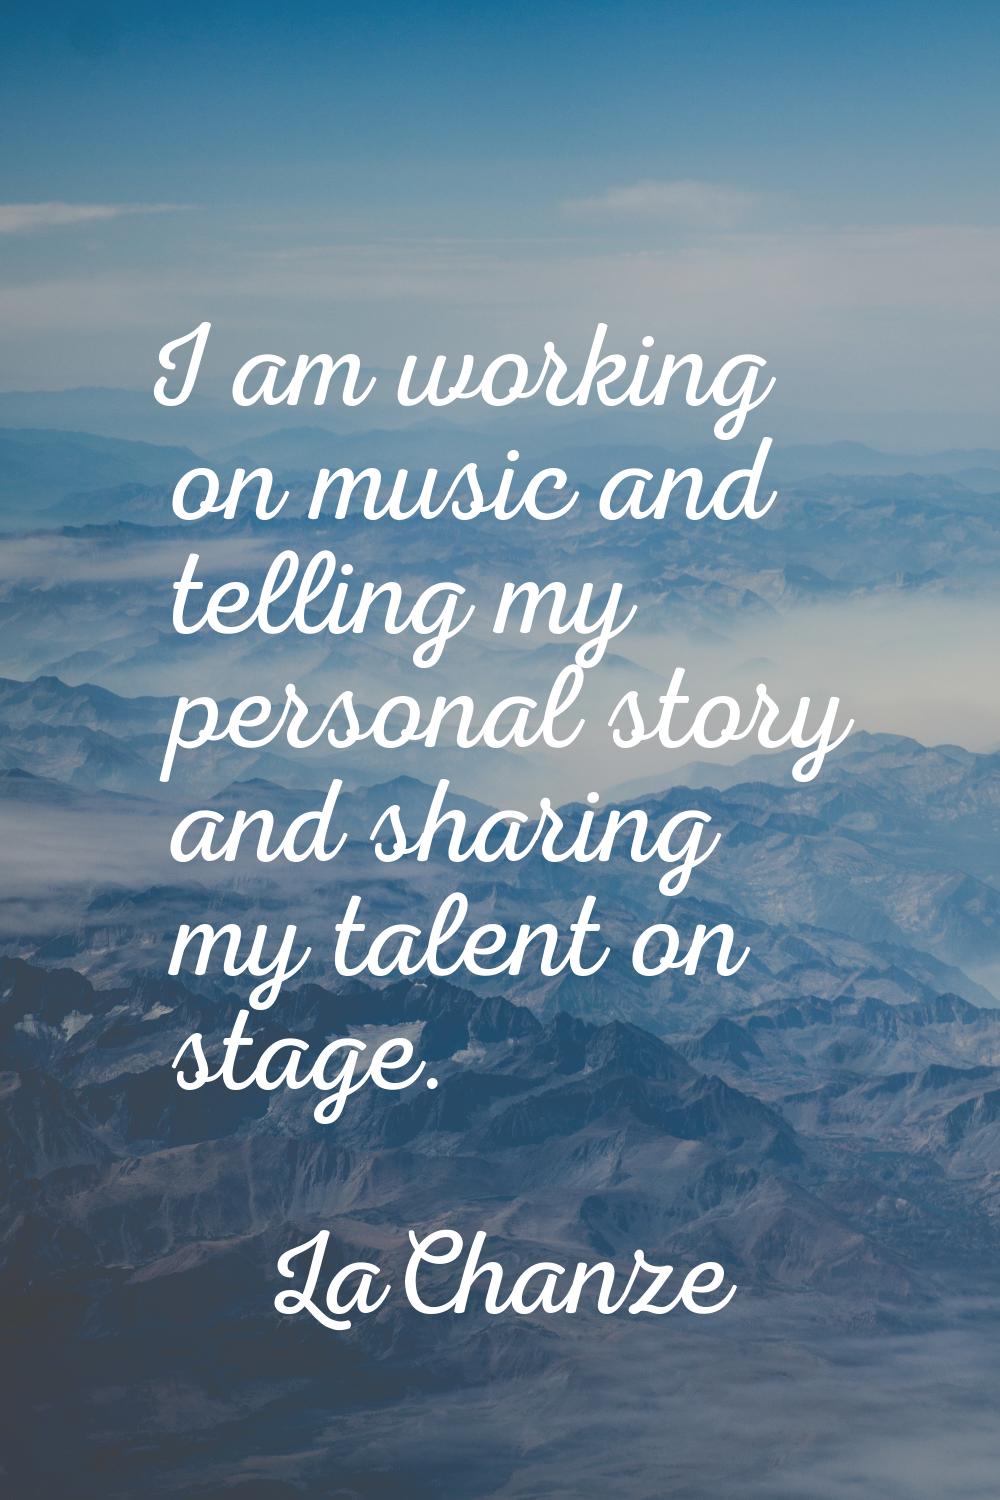 I am working on music and telling my personal story and sharing my talent on stage.